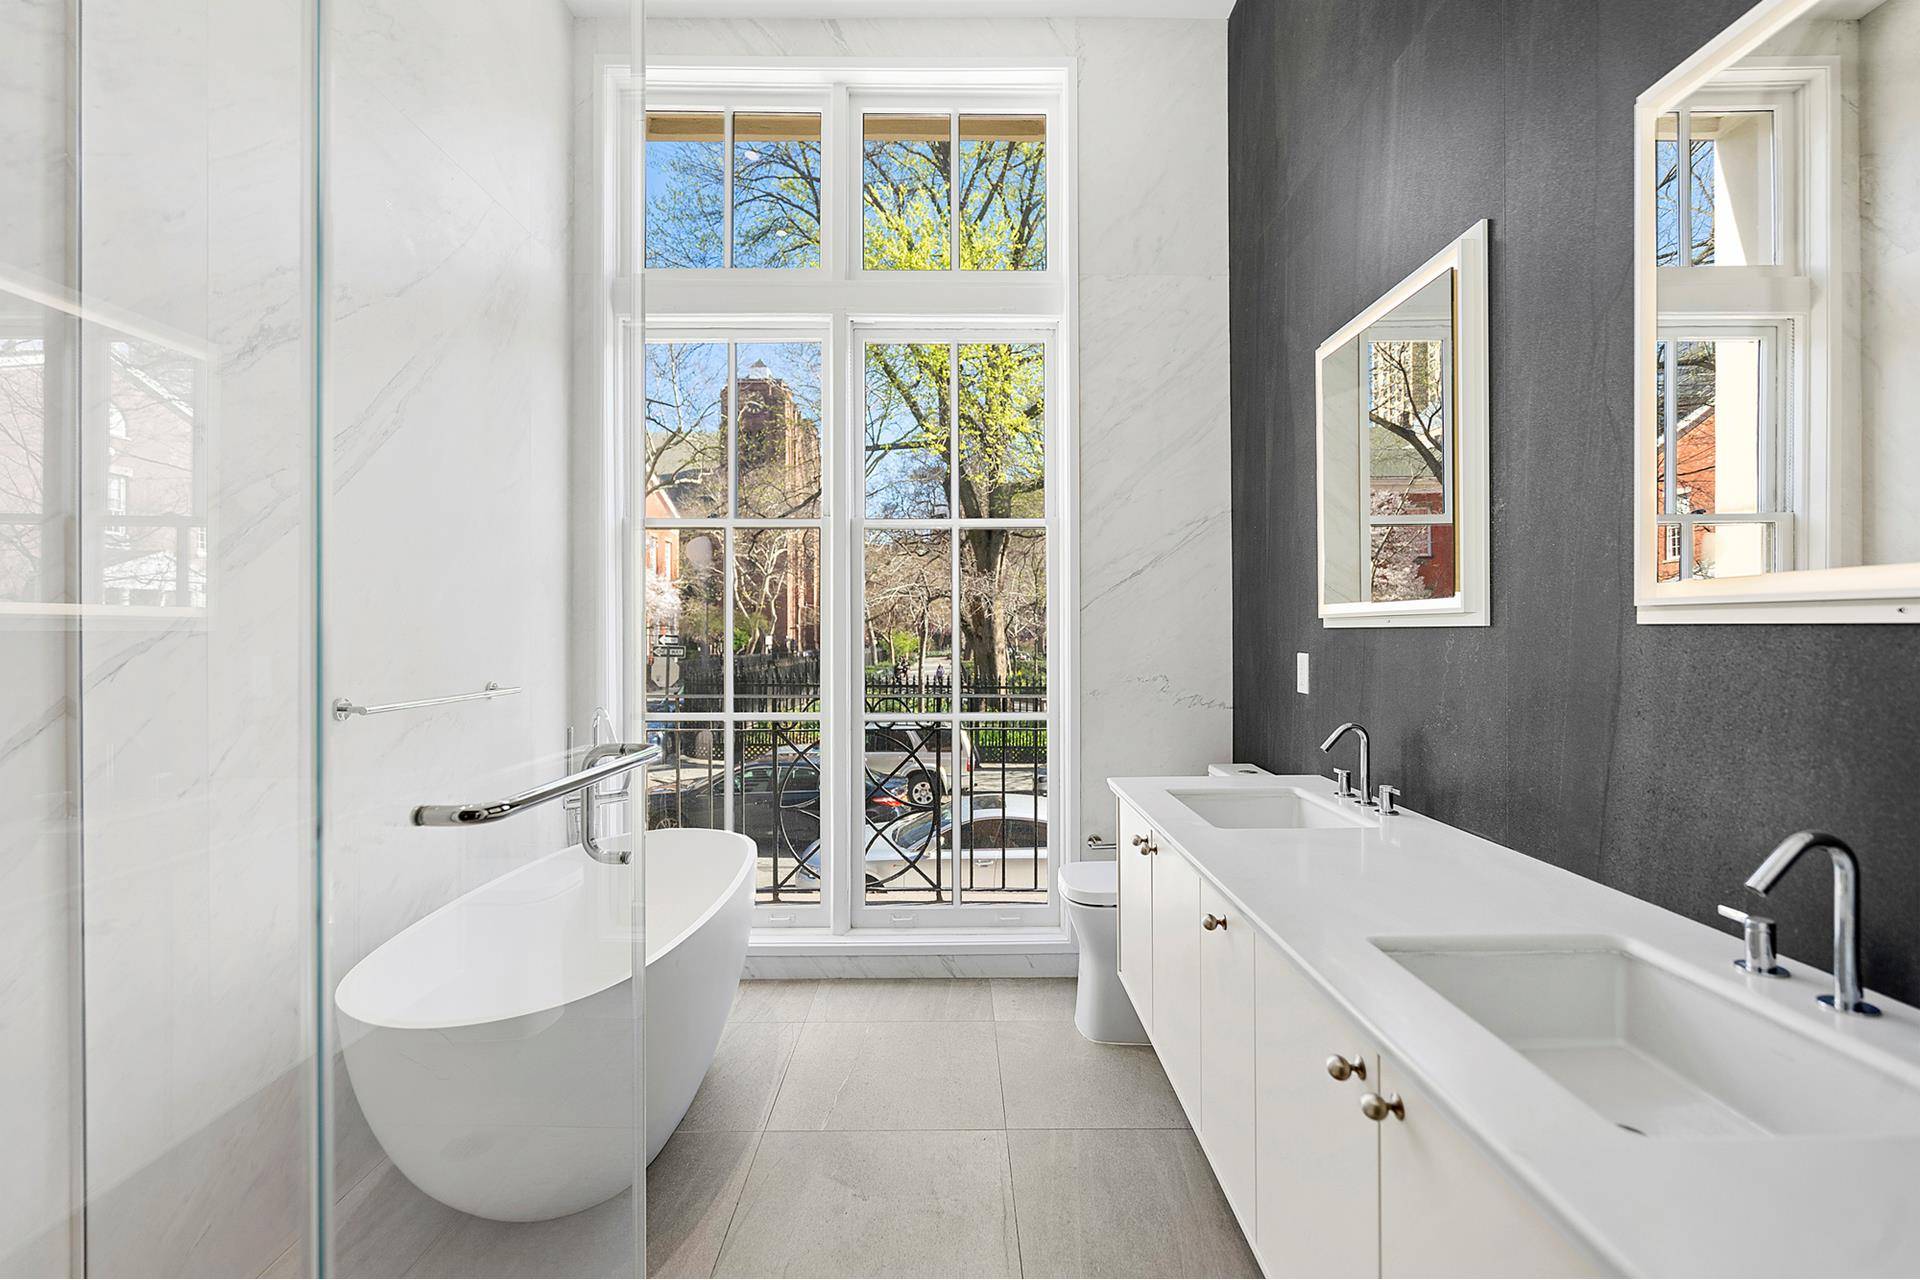 Overlooking Stuyvesant Square Park, The Holland delivers the finest in modern luxury within a historic, land marked facade.